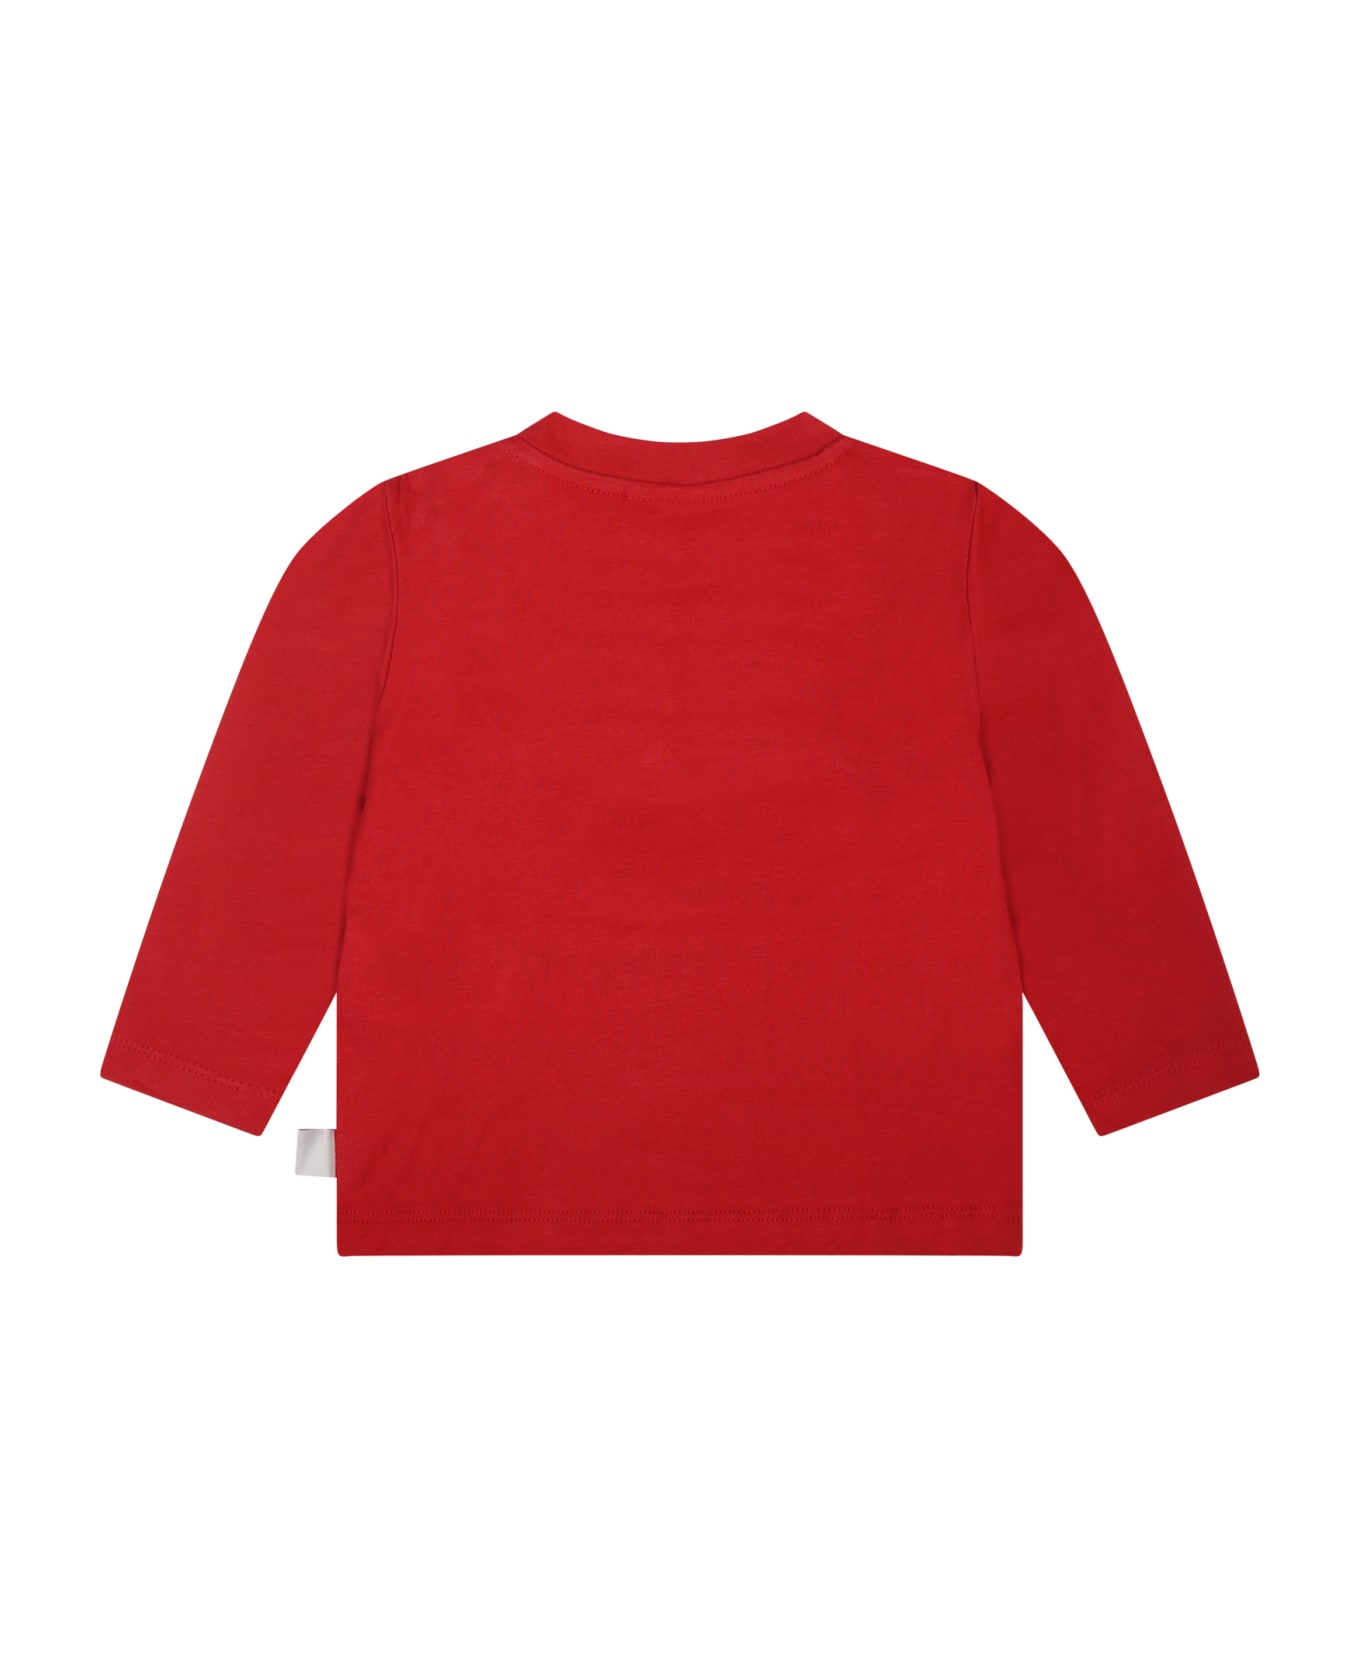 GCDS Mini Red T-shirt For Baby Boy With Logo - Red Tシャツ＆ポロシャツ